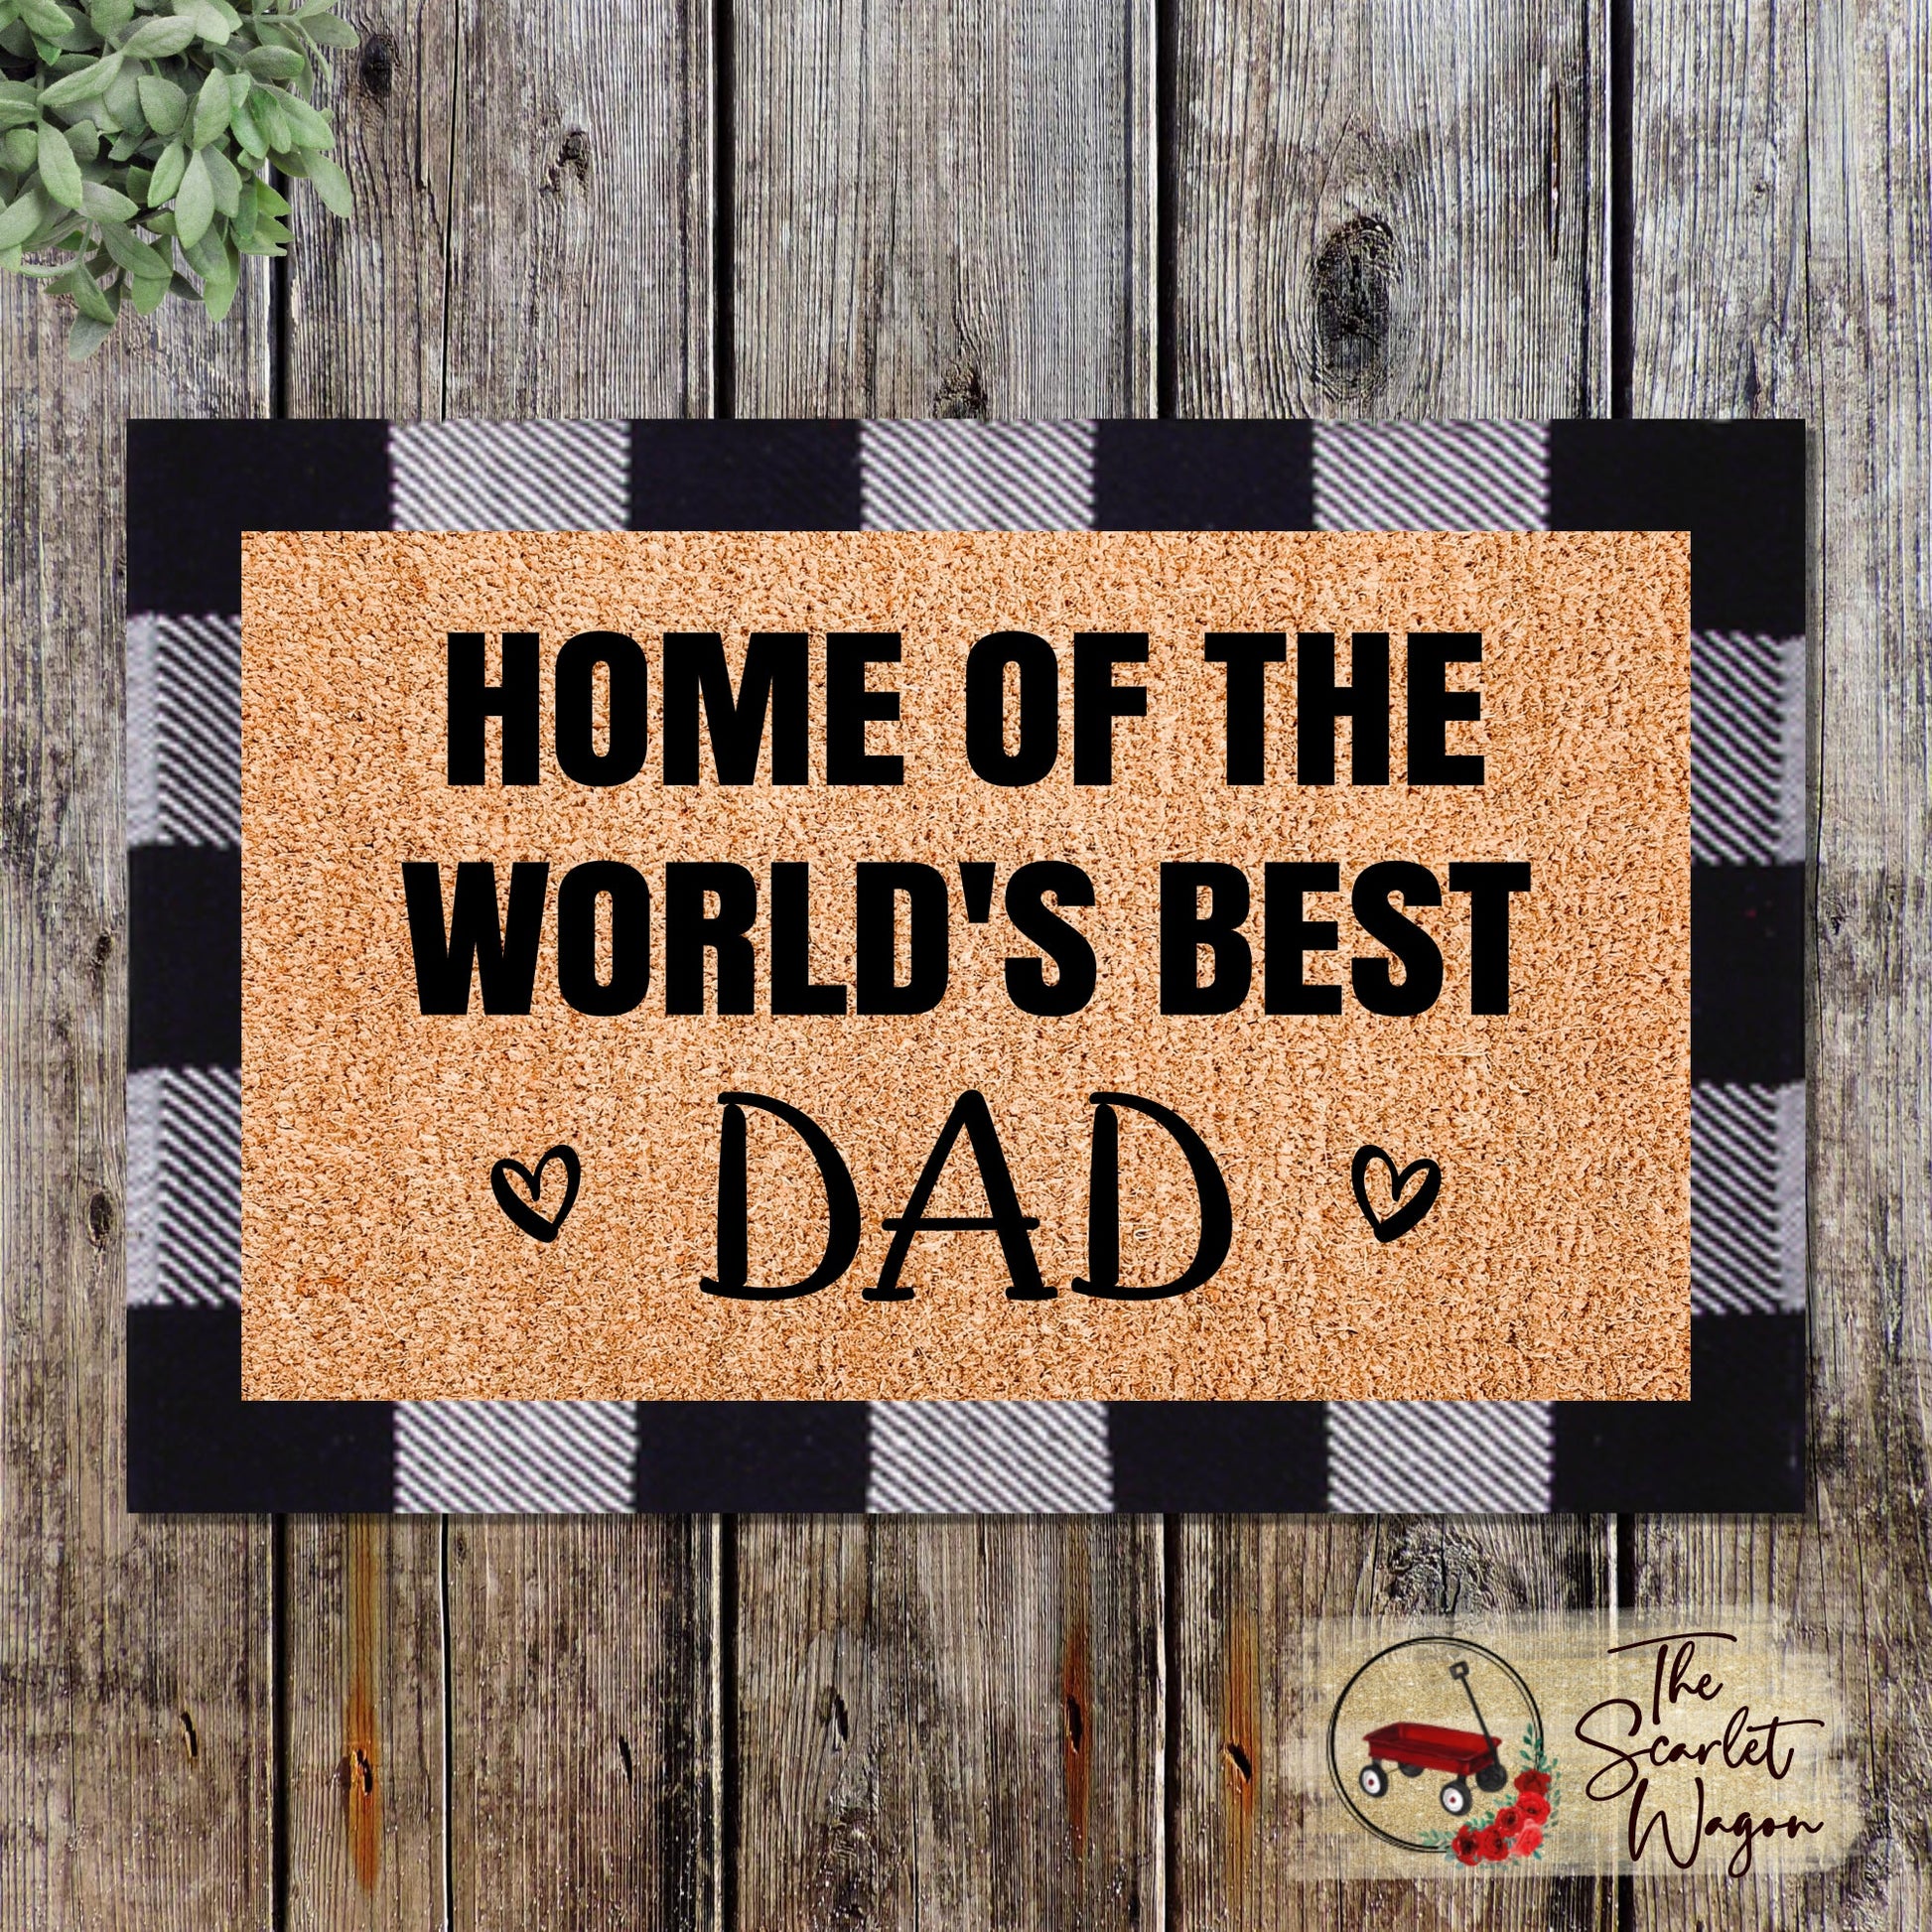 Home of the World's Best Dad Door Mats teelaunch Please Select a Size 